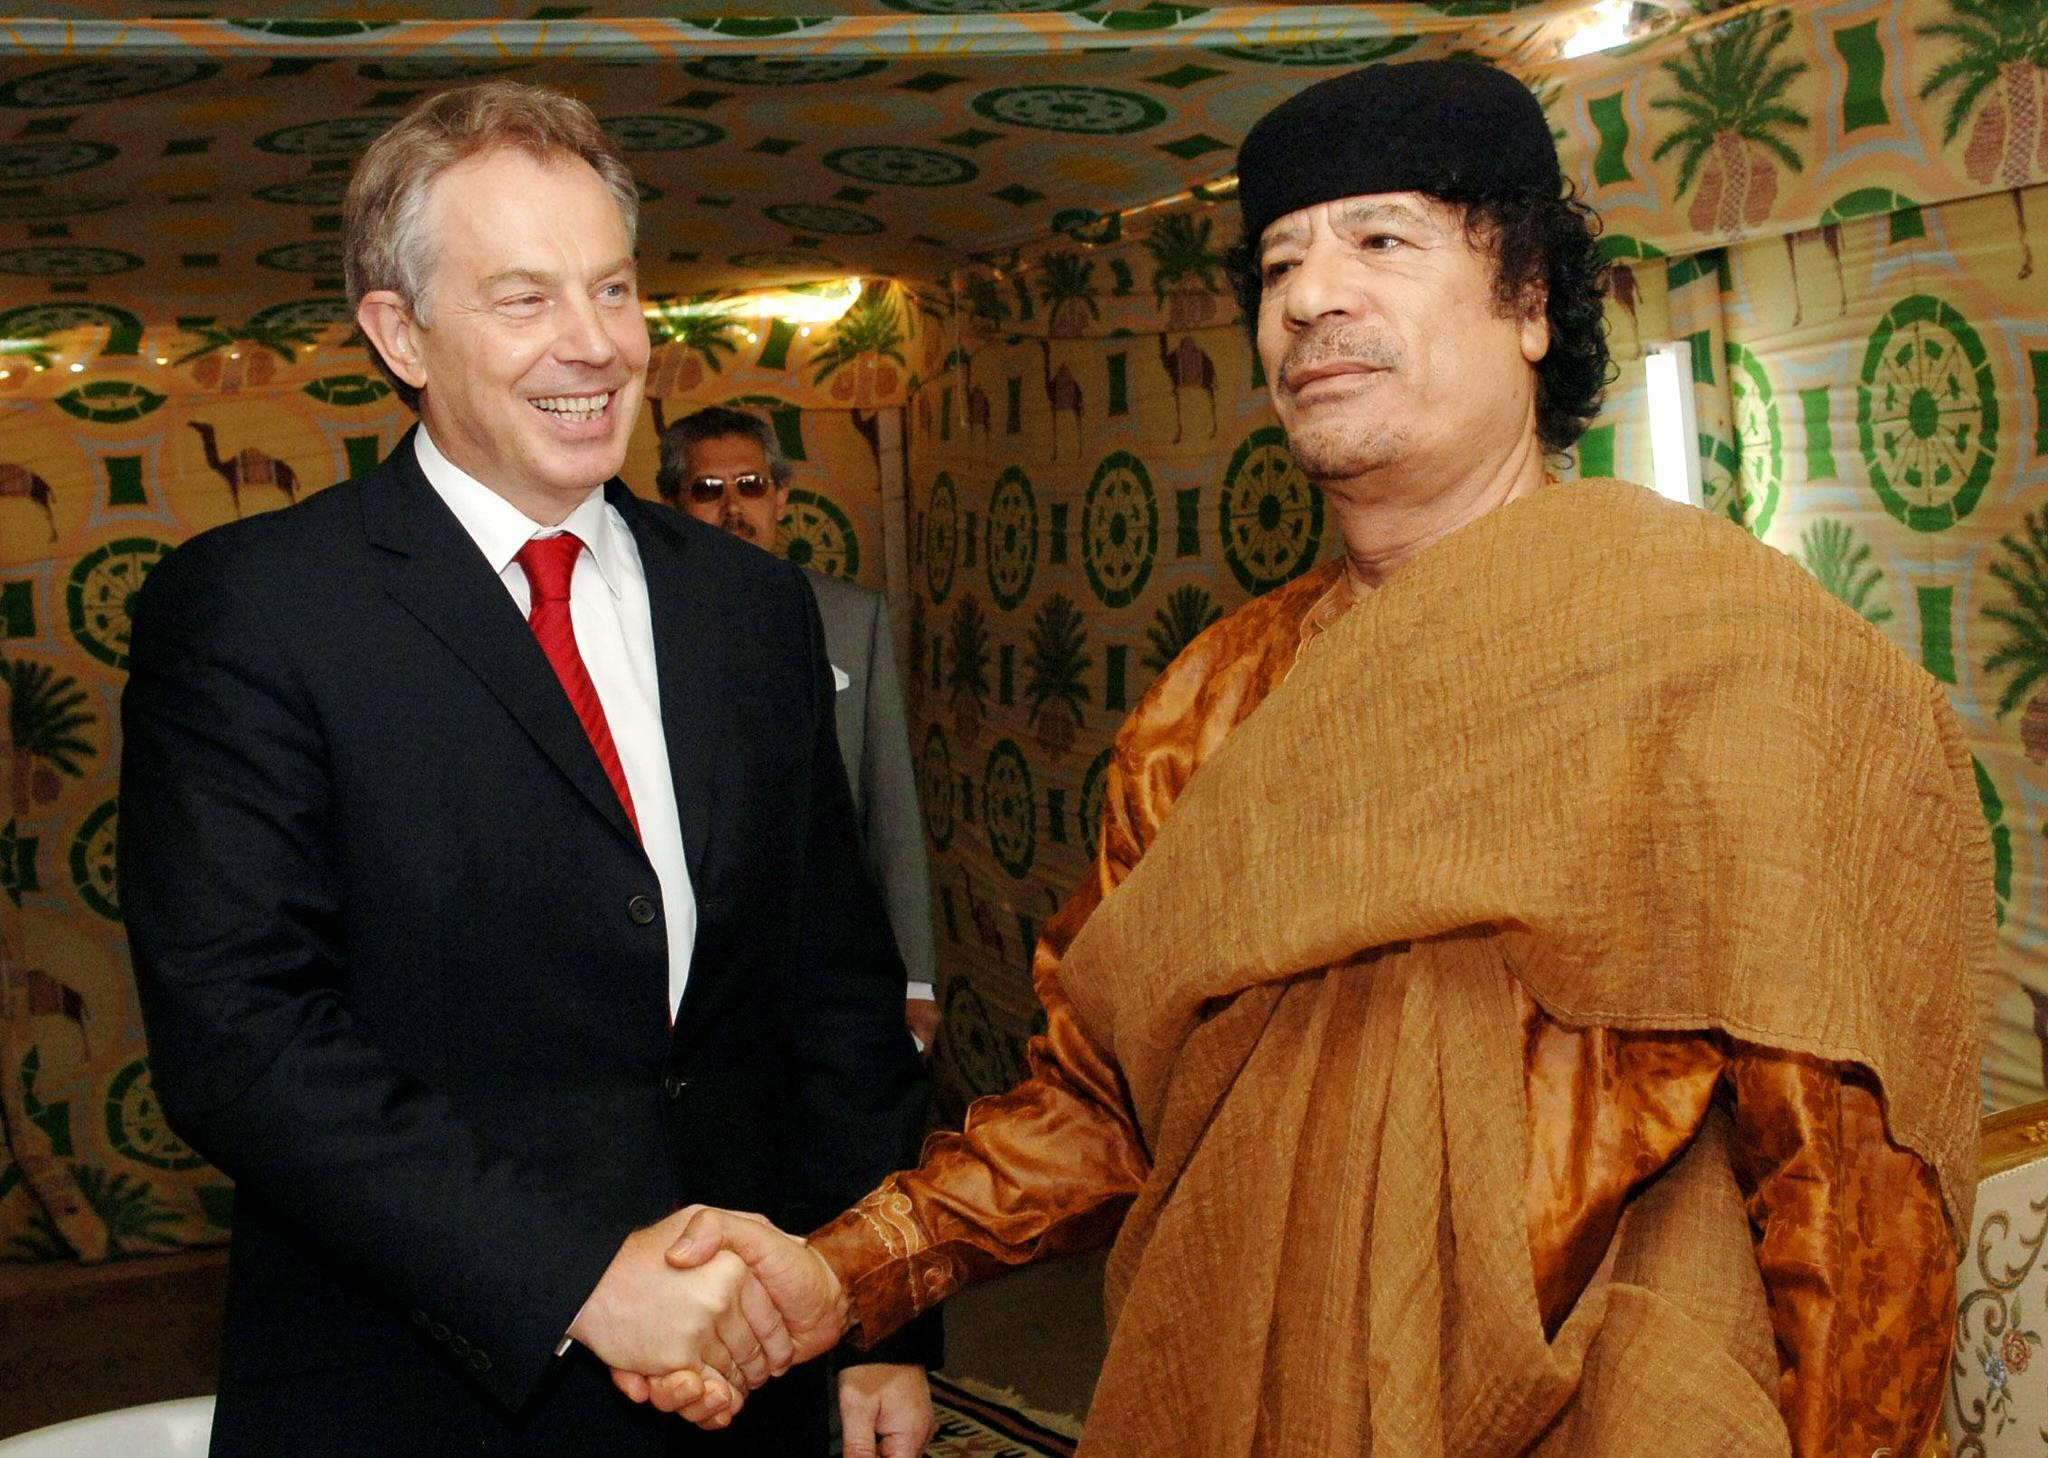 Prime Minister Tony Blair meeting Libyan leader Colonel Muammar Gaddafi at his desert base outside Sirte, south of Tripoli on May 29, 2007. (Stefan Rousseau—AP)